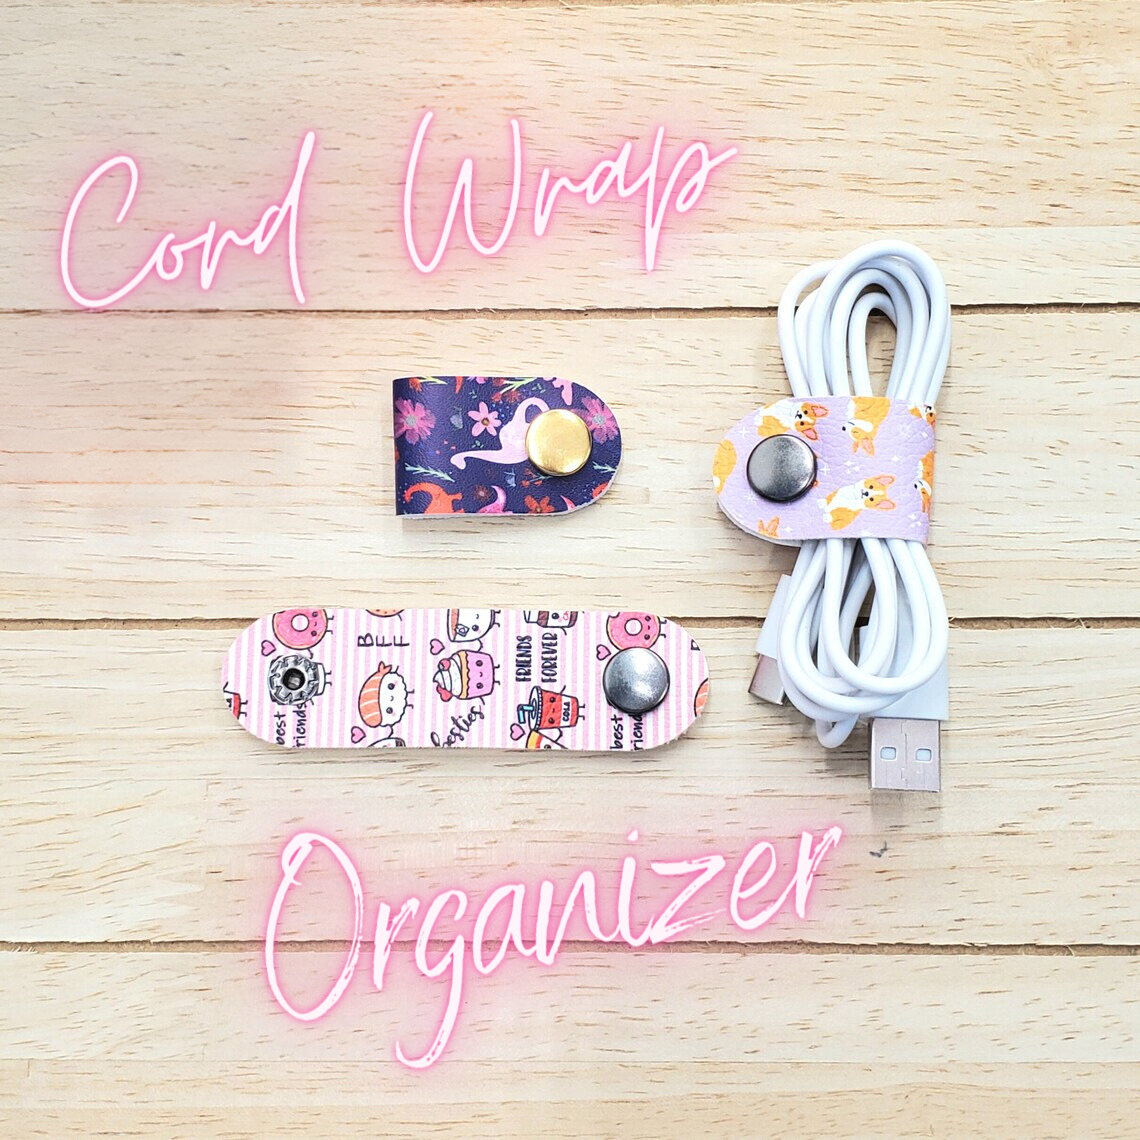 Pre-cut Cord Organizer | Small Cord Wrap, Great for travel & bags | Headphone Cord Wrap